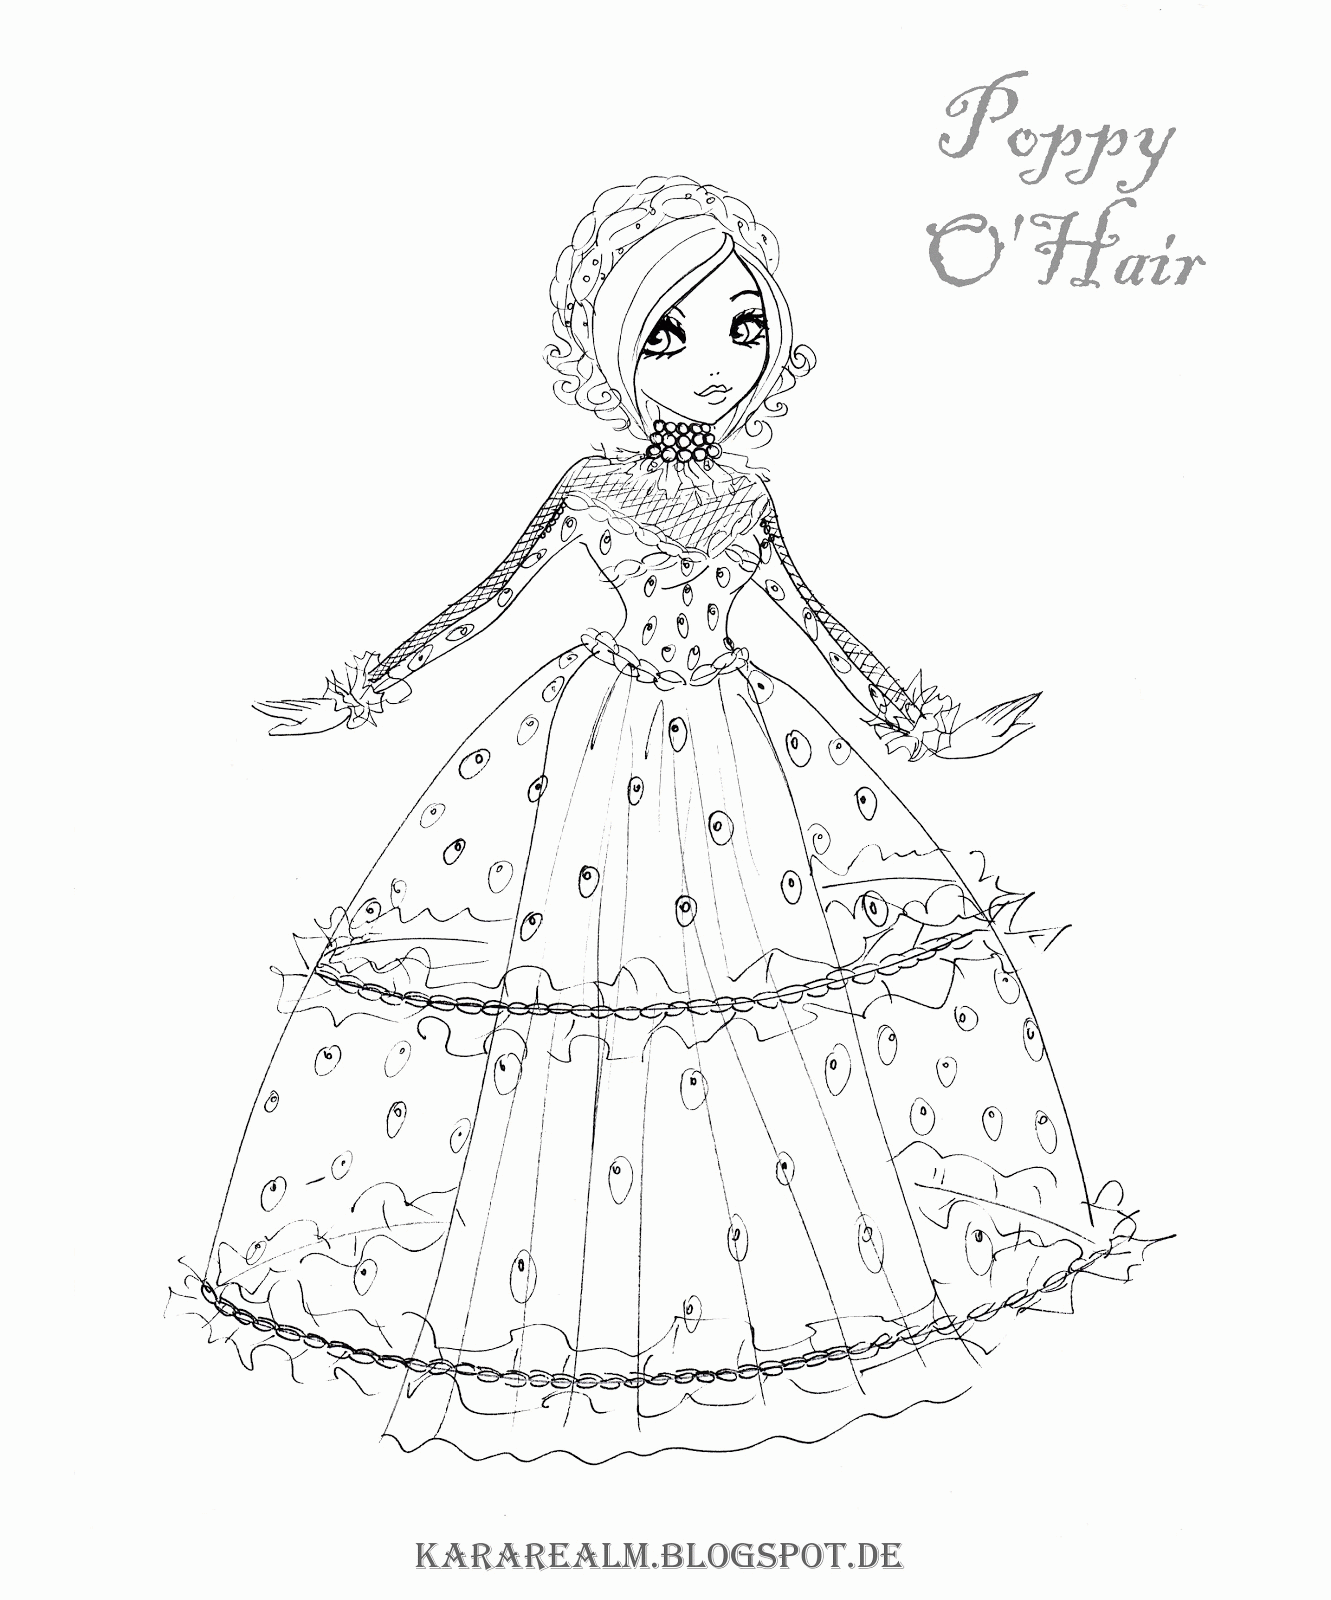 13 Pics of Duchess Swan Ever After High Coloring Pages - Duchess ...